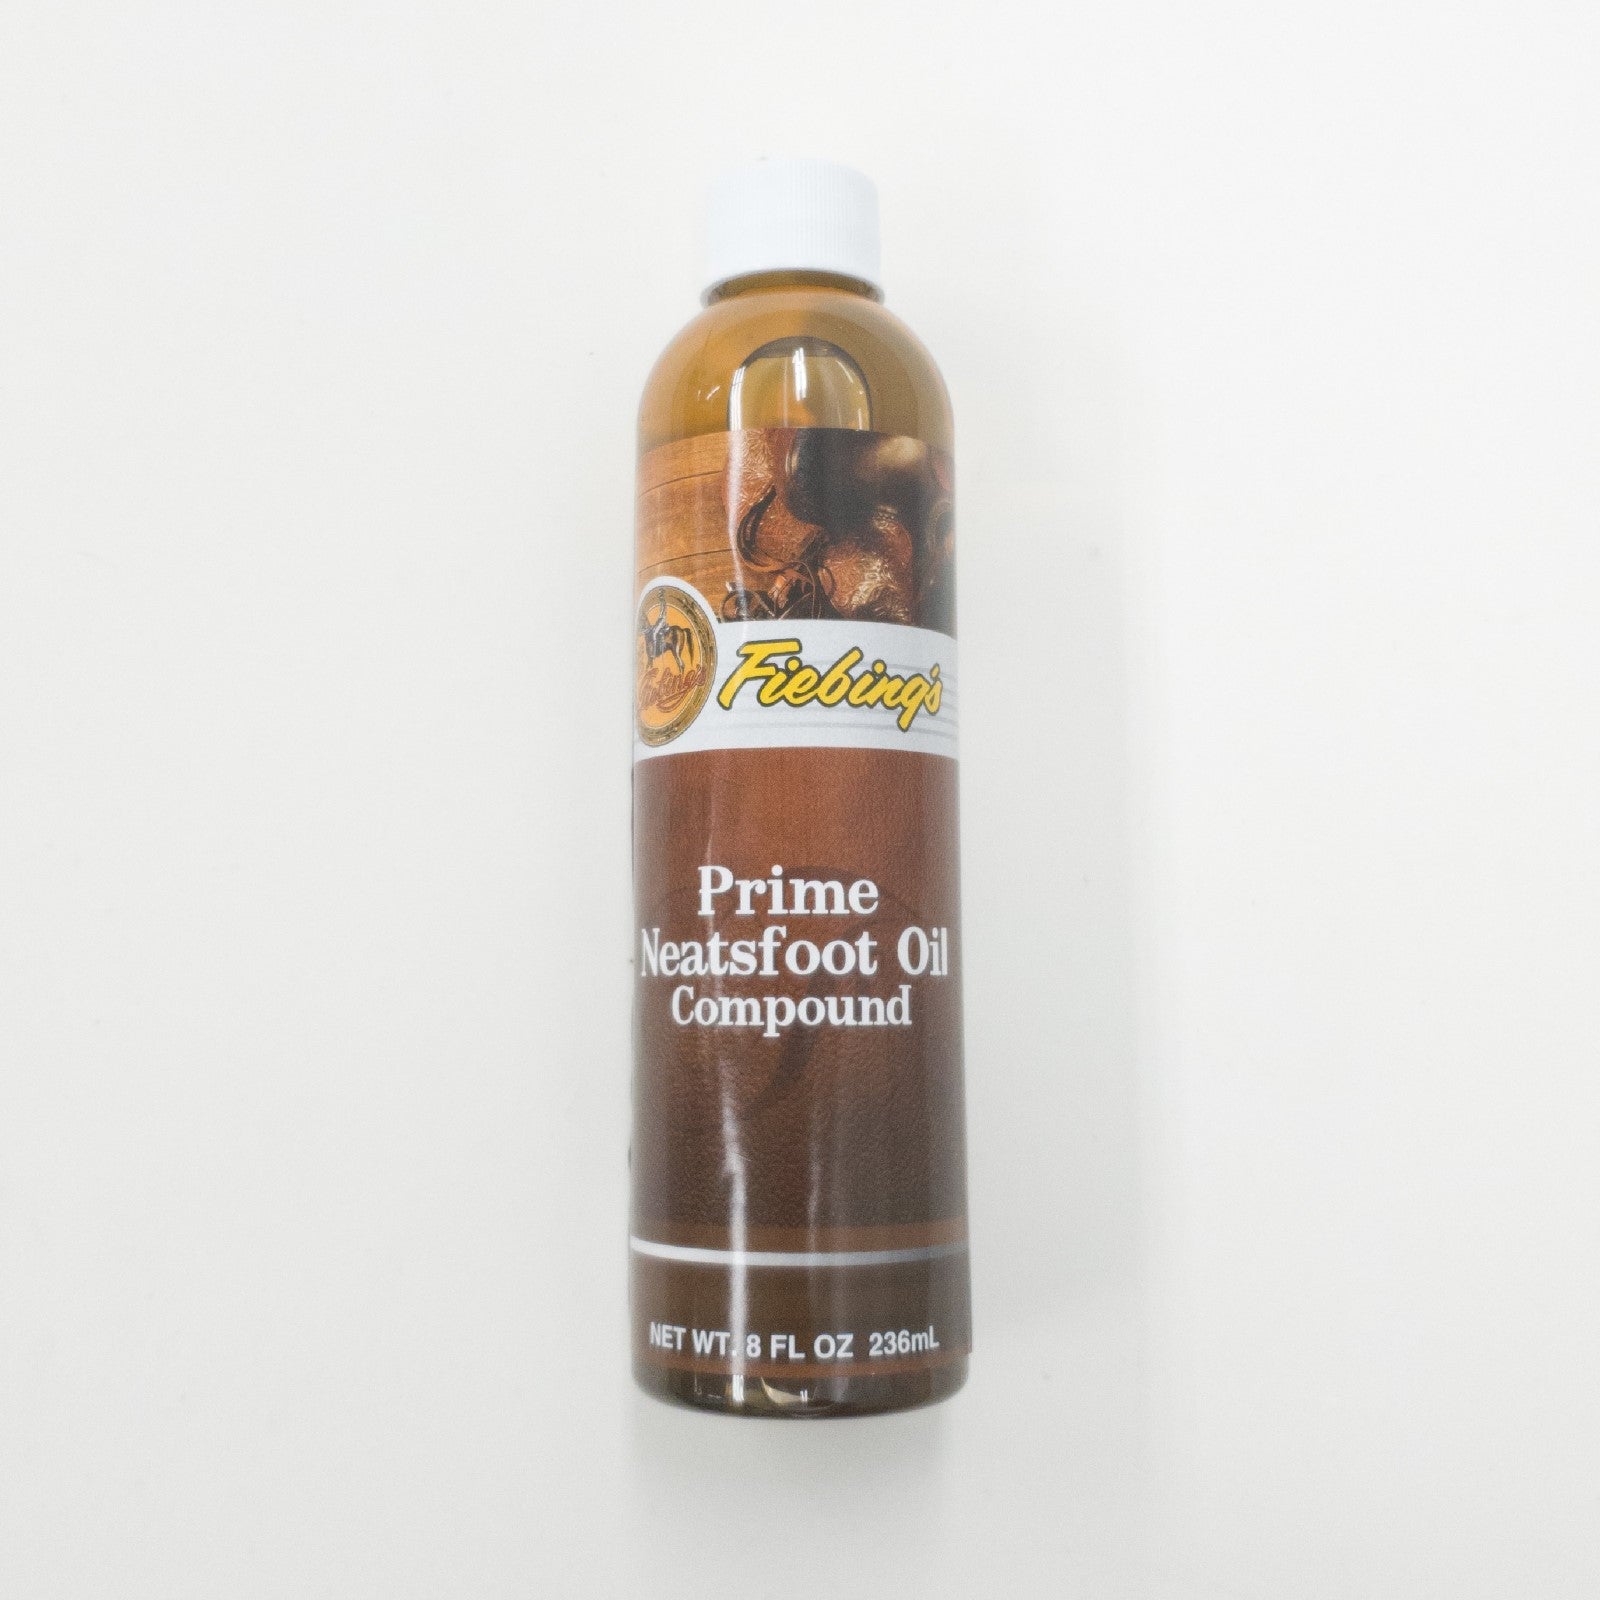 Fiebing's Pure Neatsfoot Oil 32 oz Leather Softener Comes with Applicator